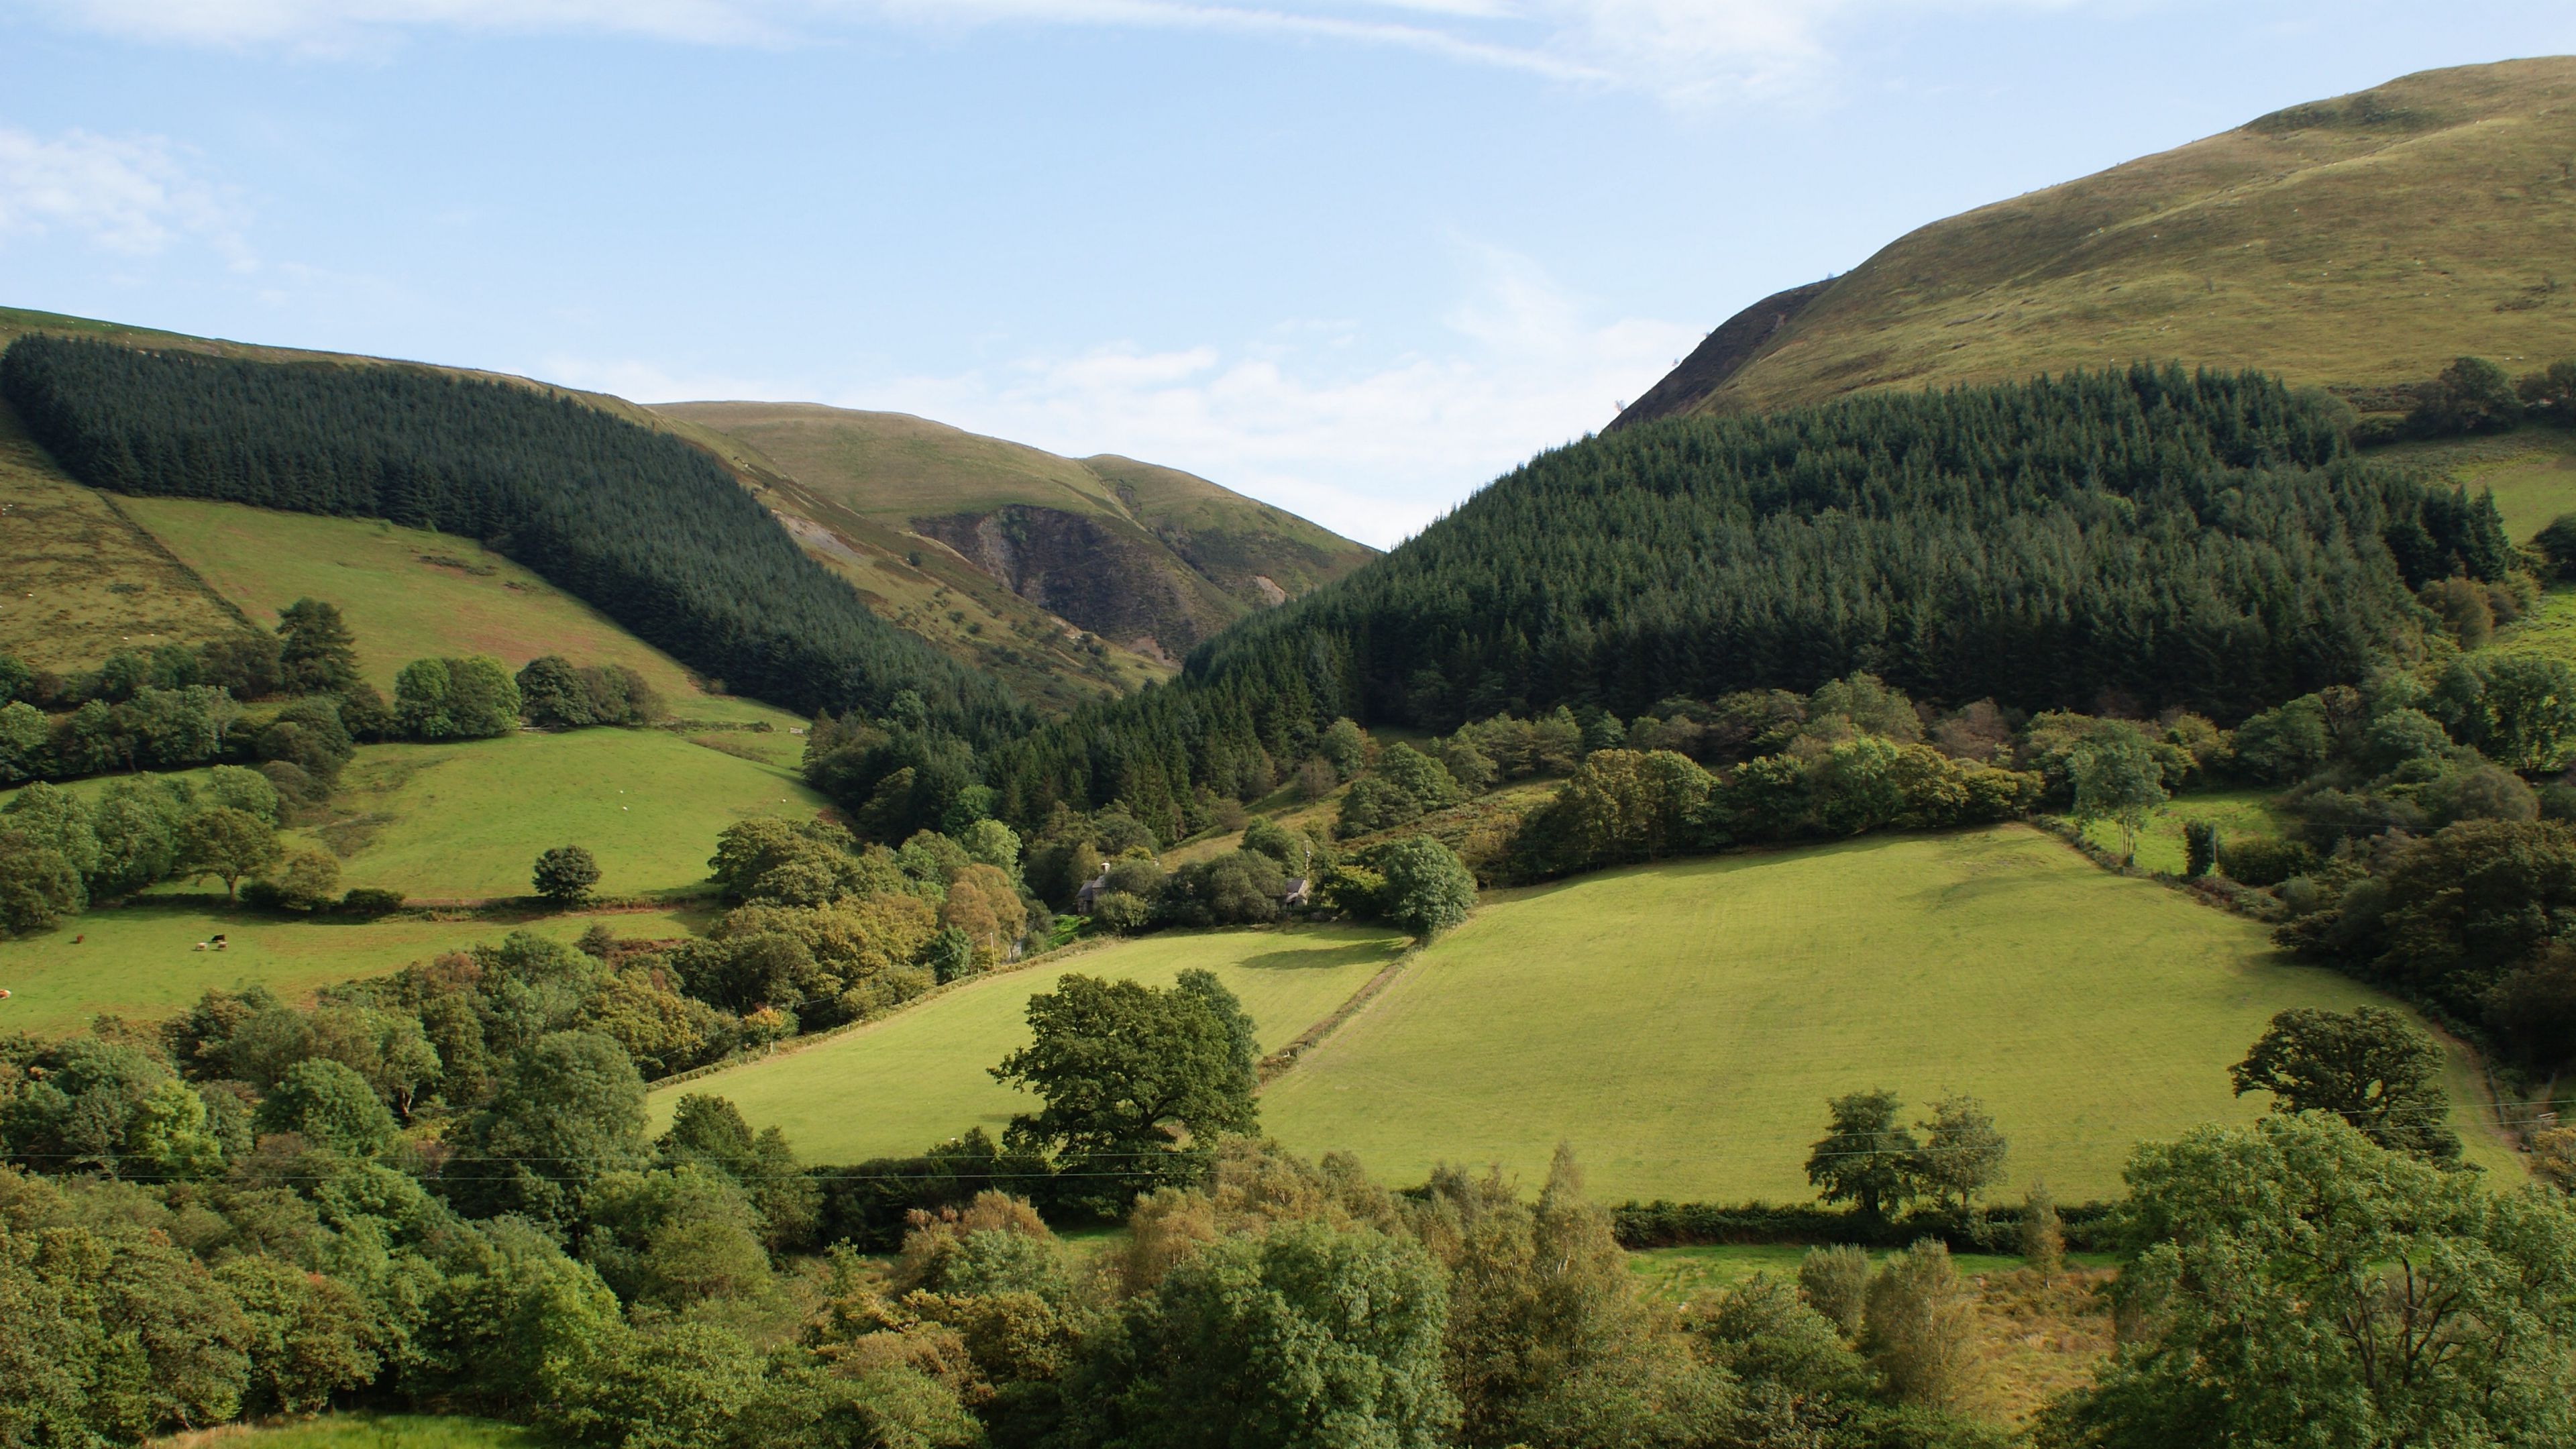 Download wallpaper 3840x2160 wales, britain, landscape, valley, hill 4k uhd 16:9 HD background